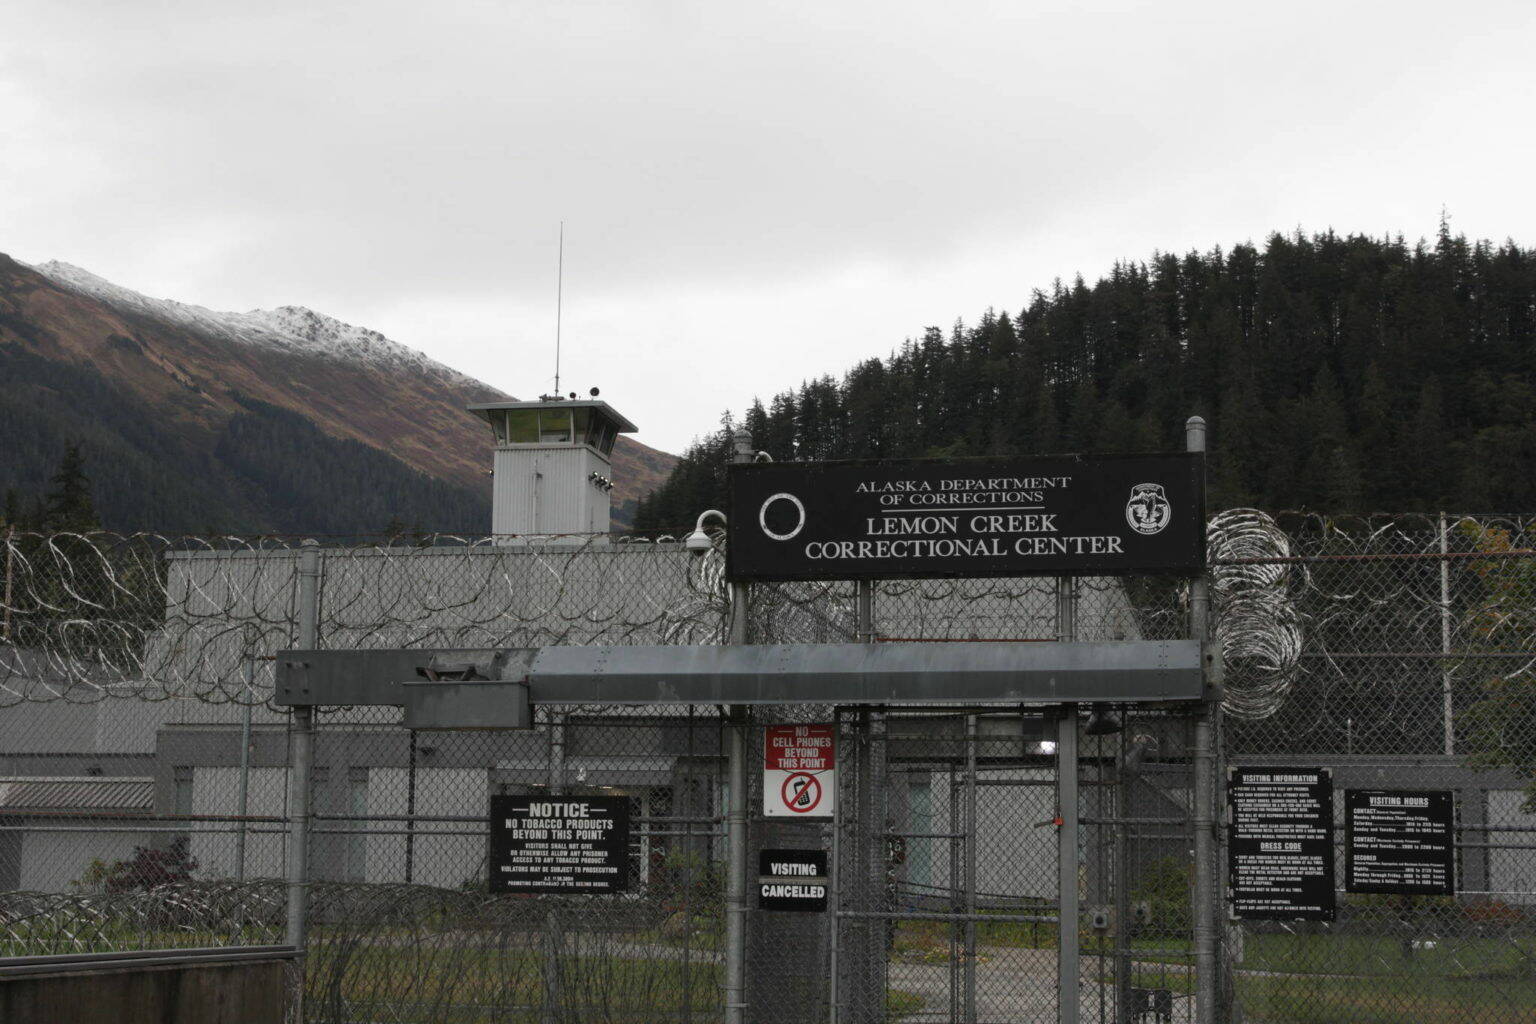 A number of complaints about issues at Lemon Creek Correctional Center as it dealt with COVID issues in 2020 were addressed in a recent news release from the state ombudsman’s office. (Michael S. Lockett / Juneau Empire File)